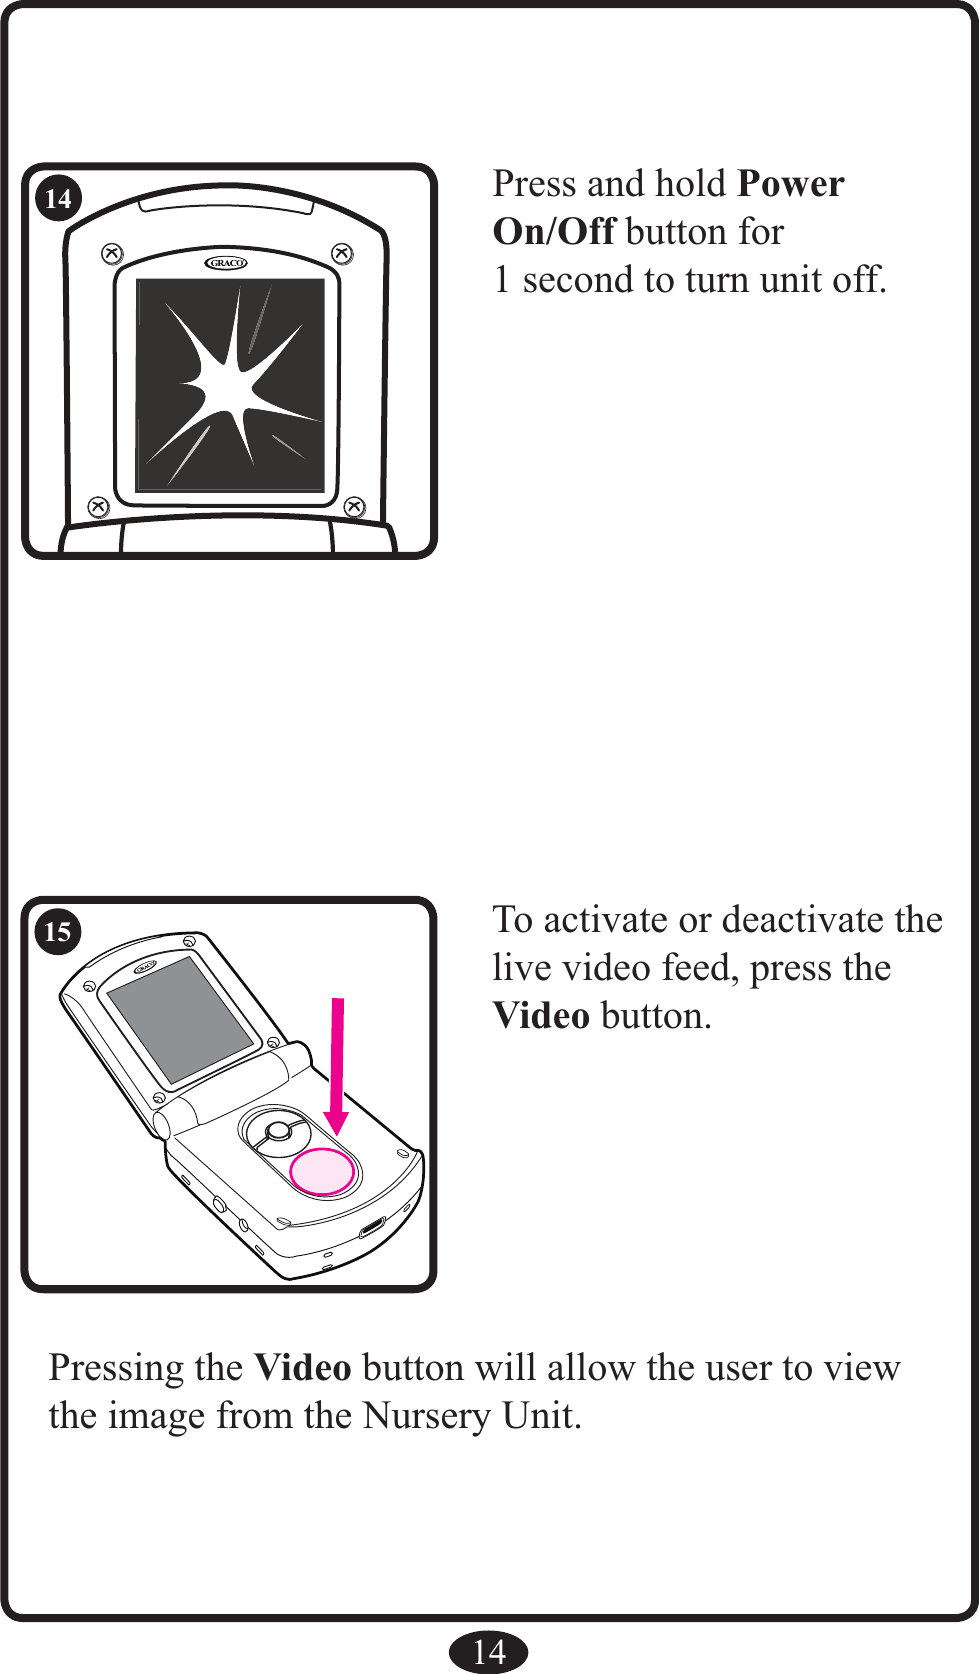 RRPress and hold Power On/Off button for 1 second to turn unit off.14To activate or deactivate the live video feed, press the Video button.Pressing the Video button will allow the user to view the image from the Nursery Unit.1415